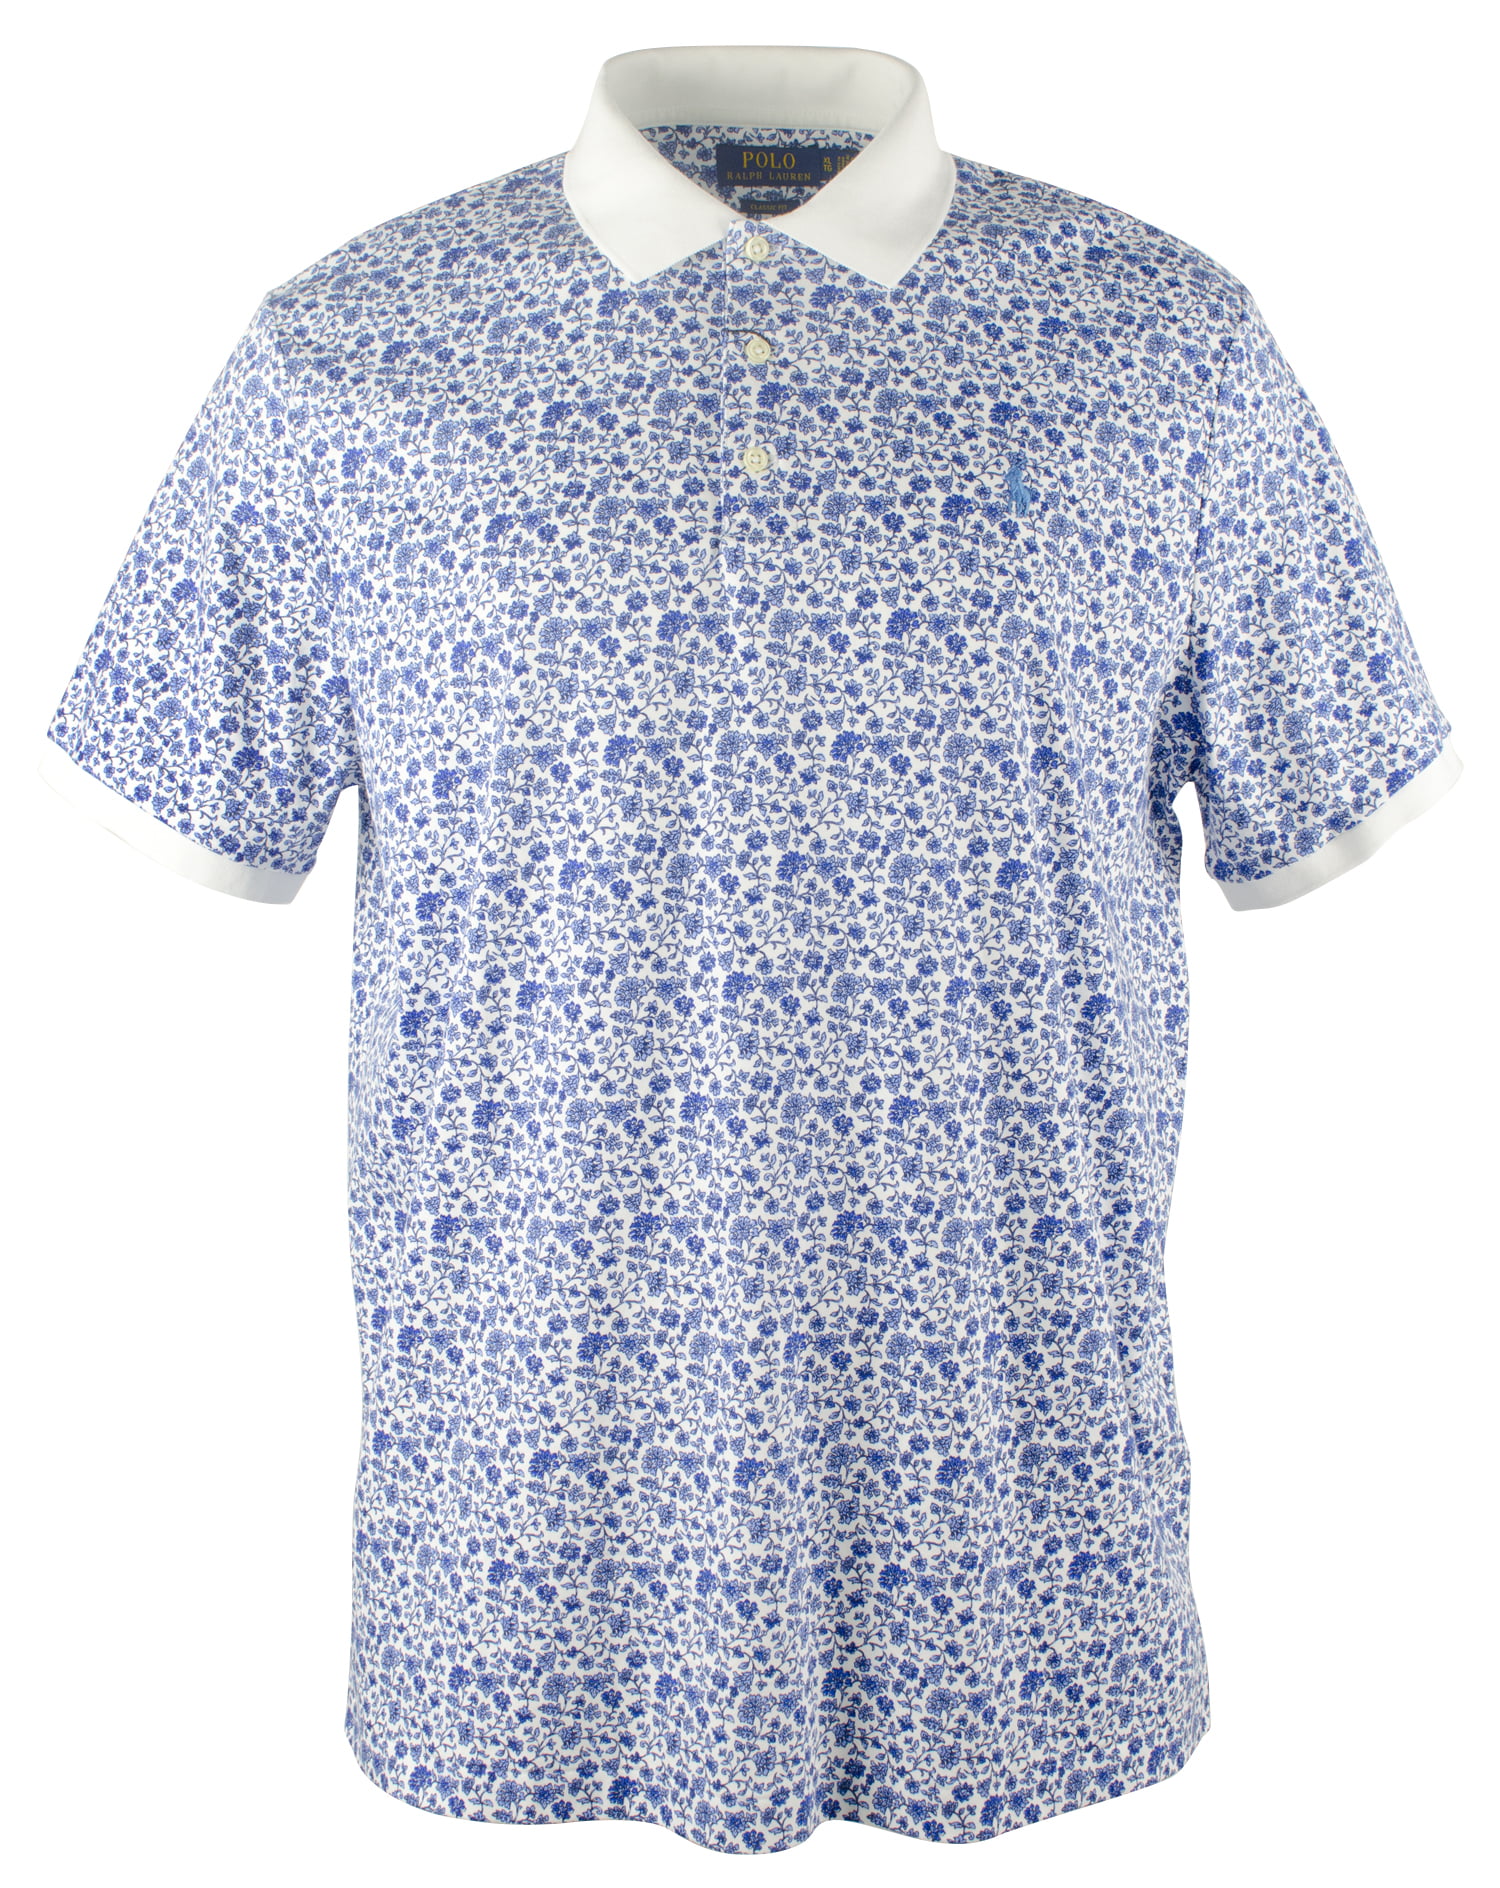 Mens Polo Shirt White with Designer Blue Florals Slim Fit Stretch 3 Button